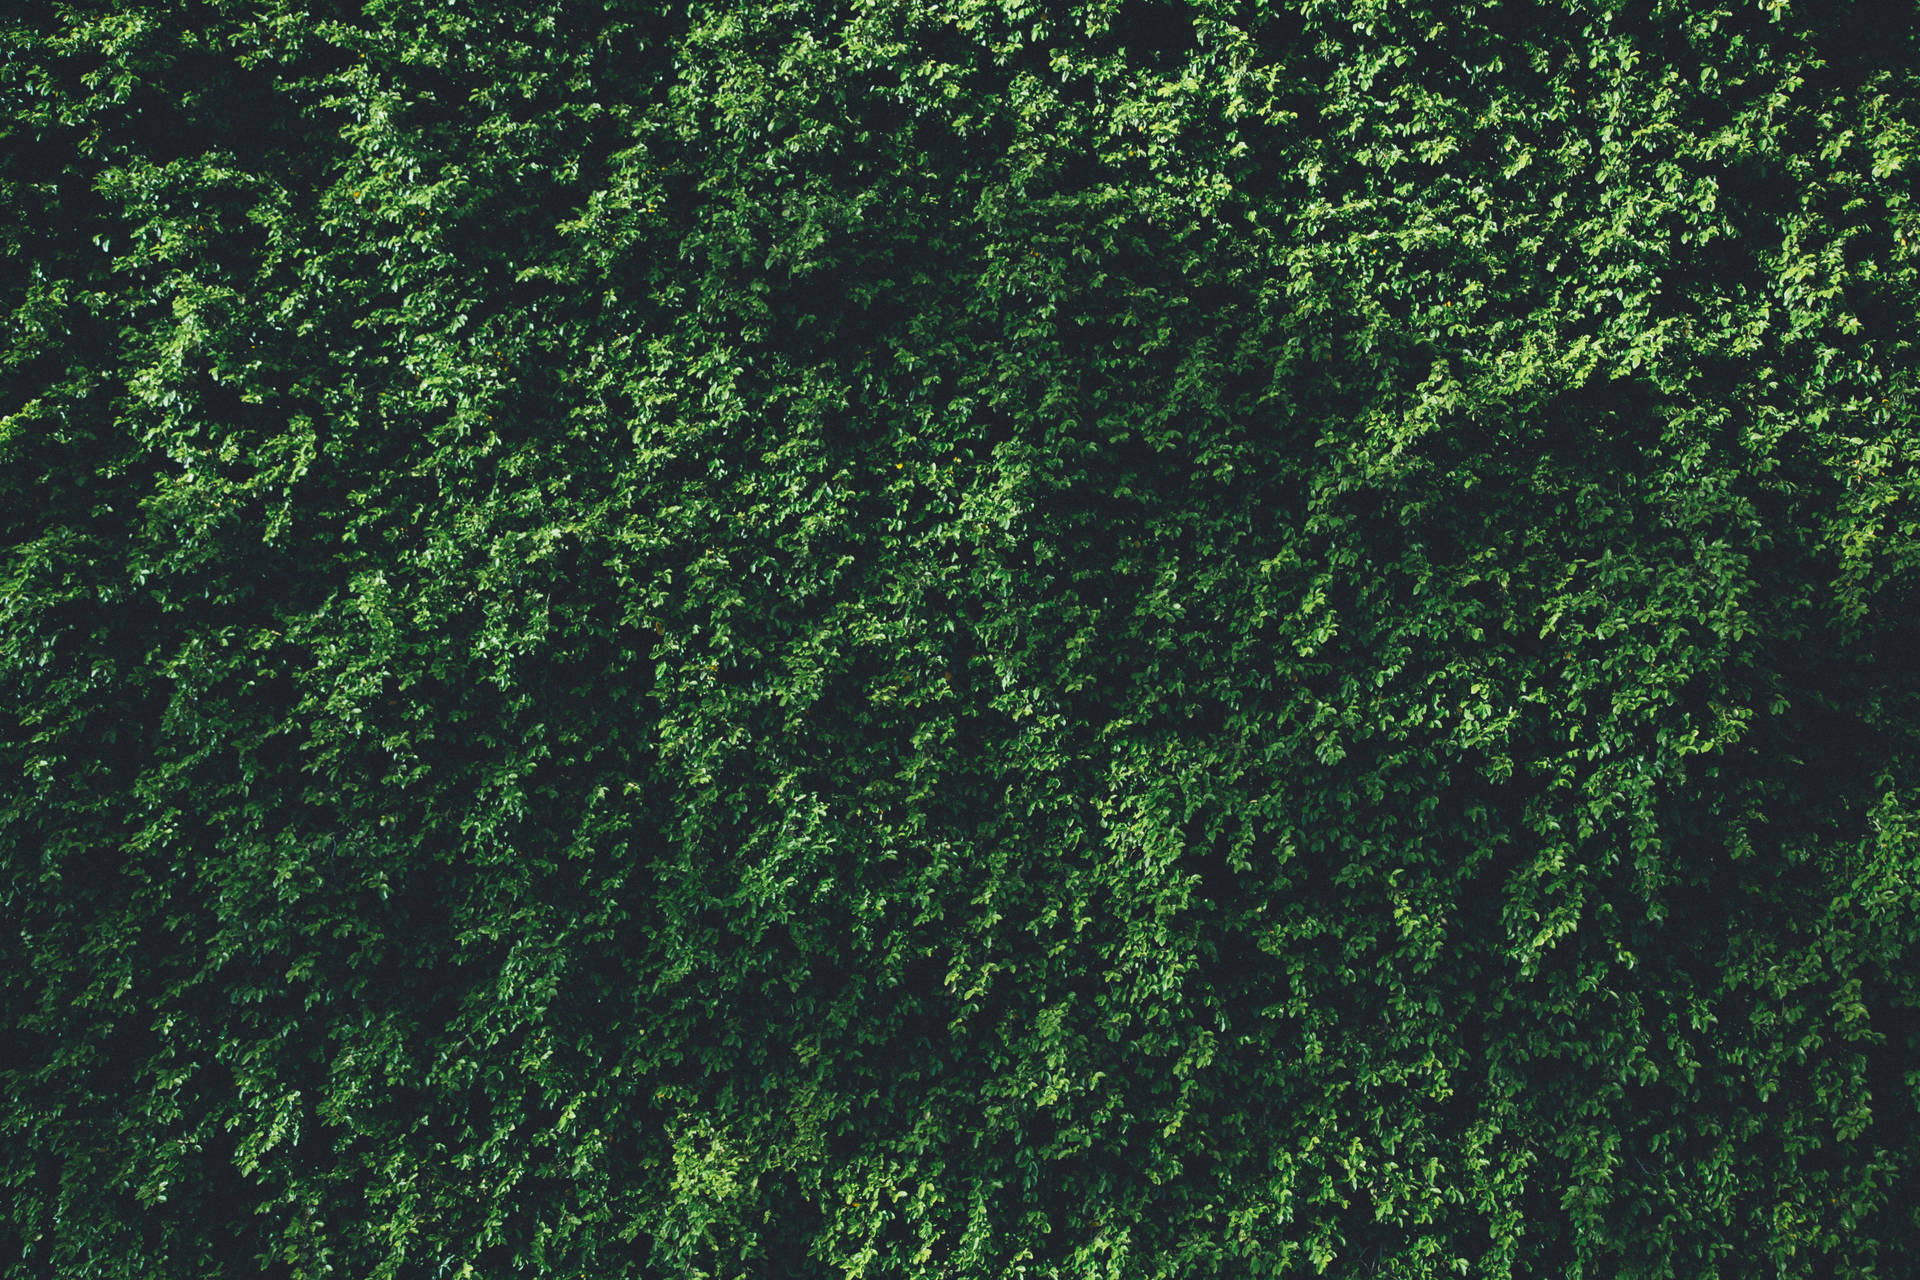 Wall Of Green Leaves